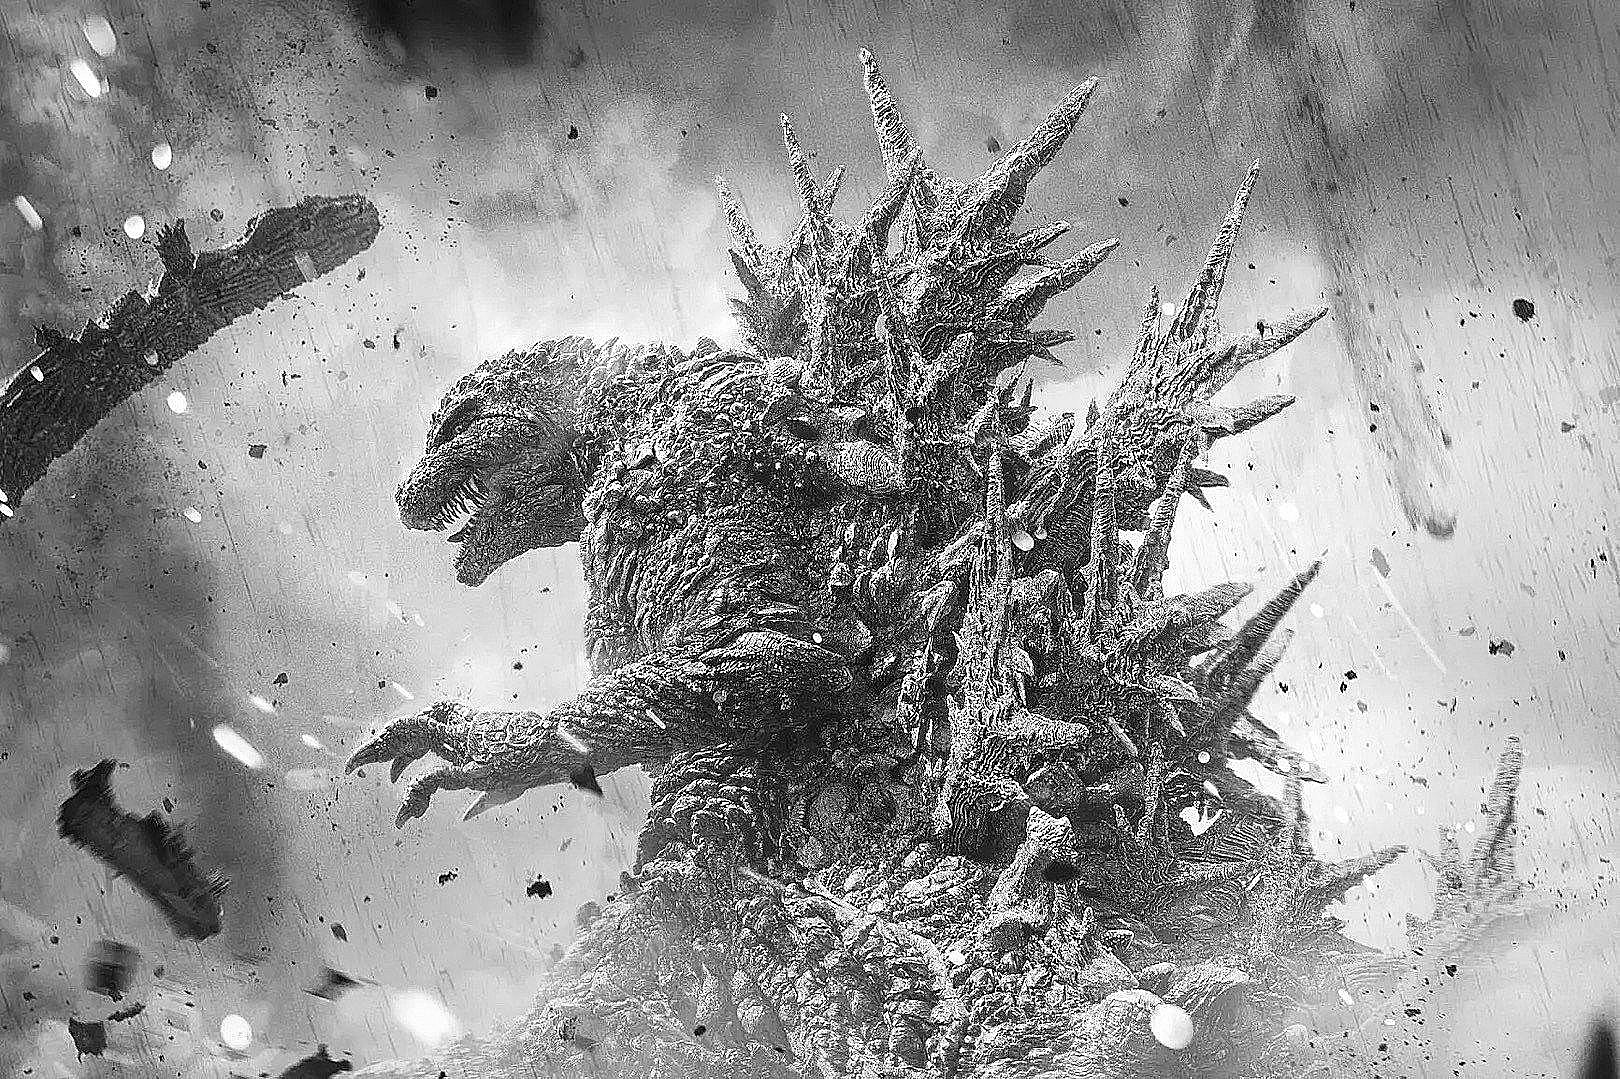 Black and White ‘Godzilla Minus One’ Cut Is Headed to Theaters